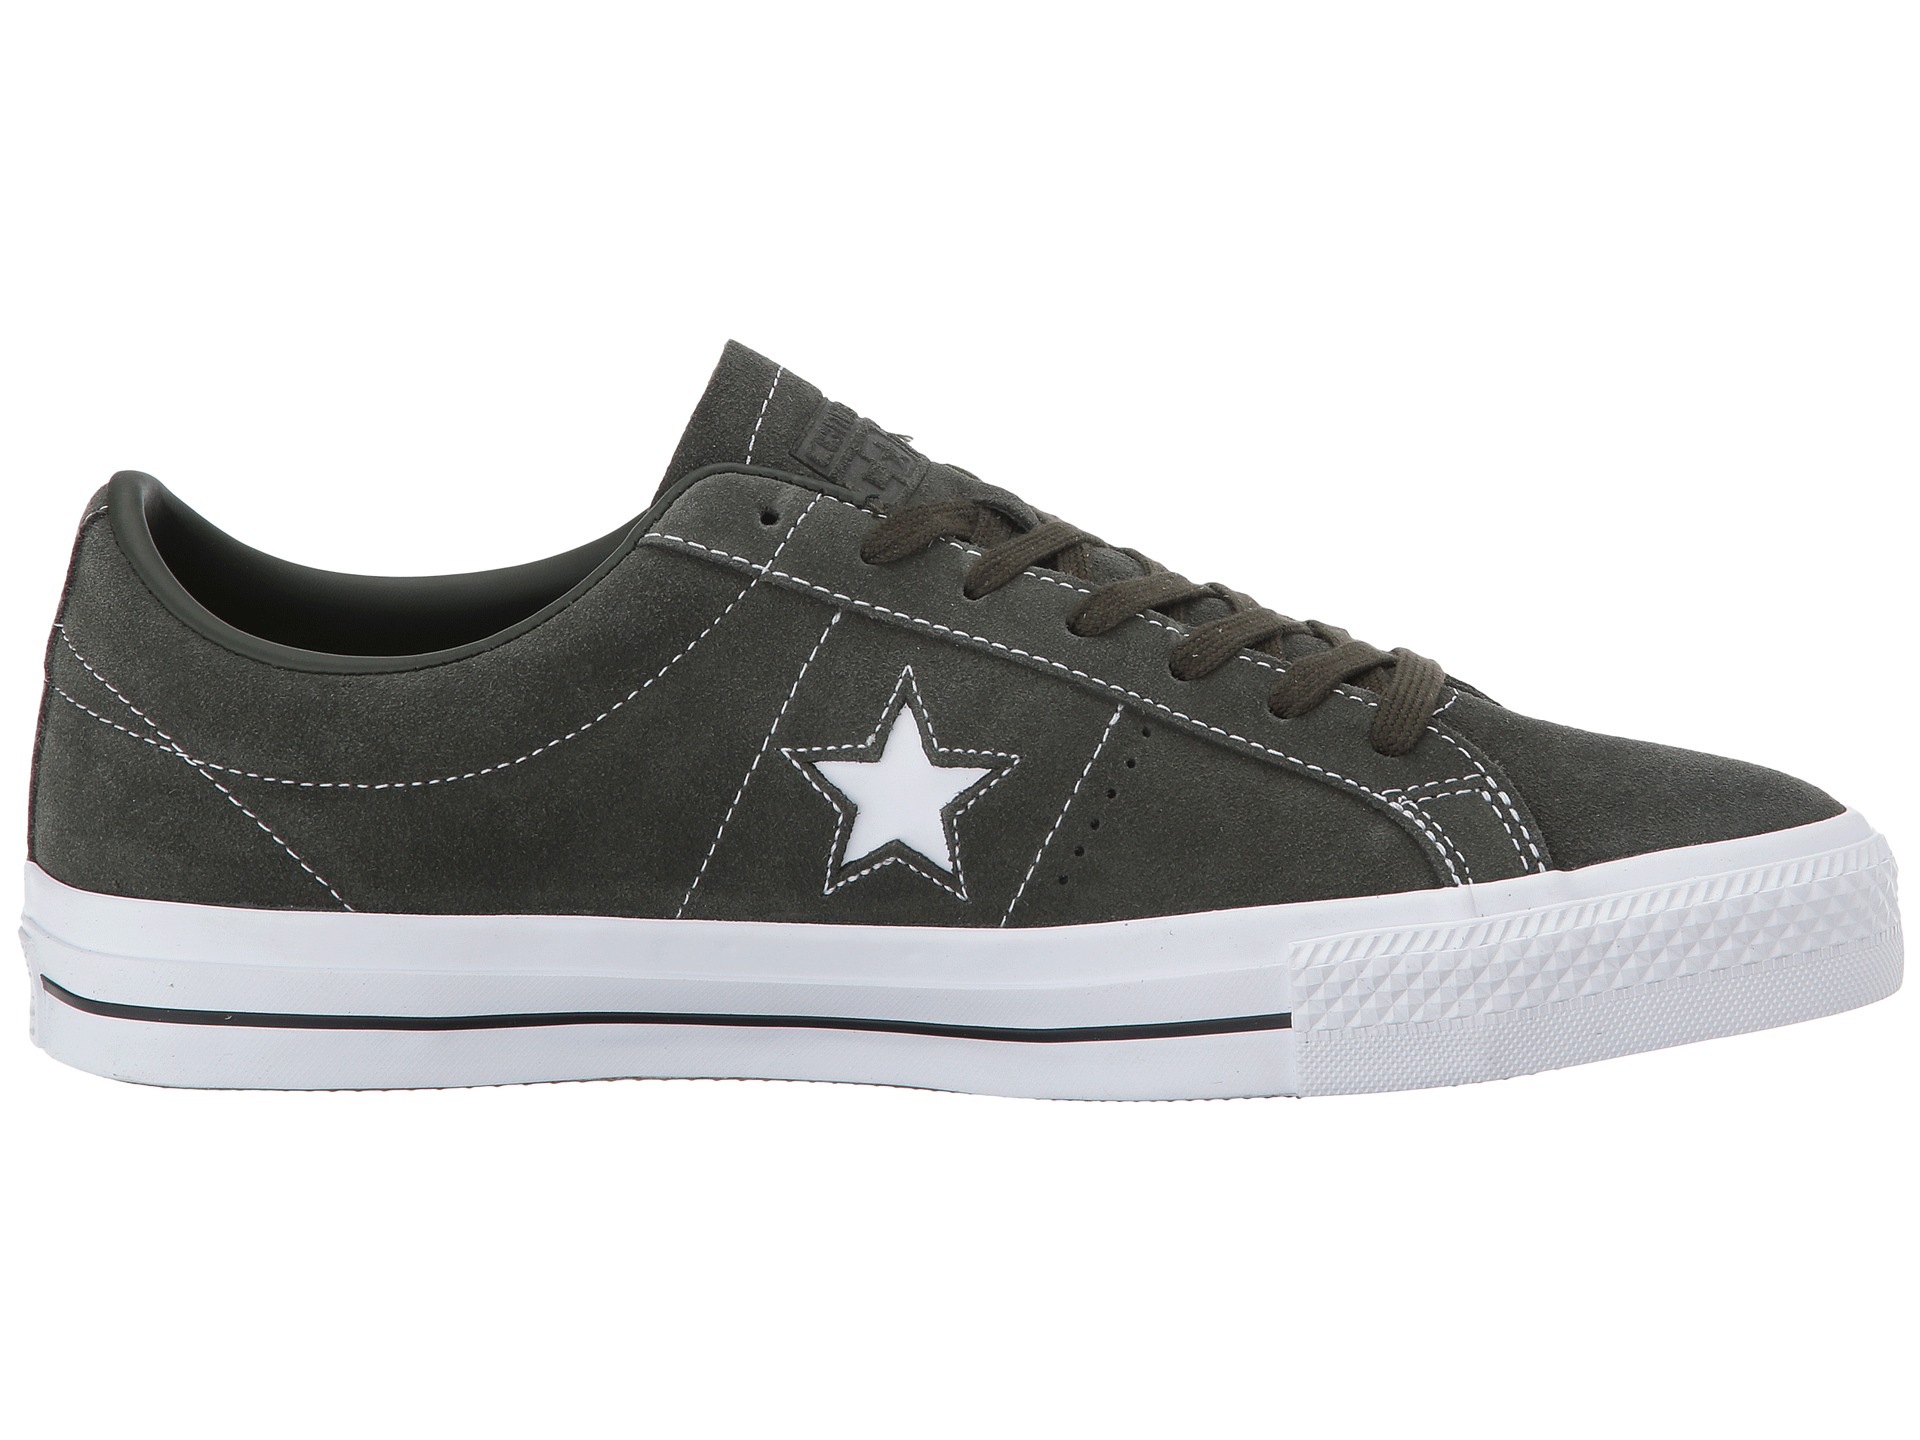 Converse Skate One Star Pro Ox at Zappos.com